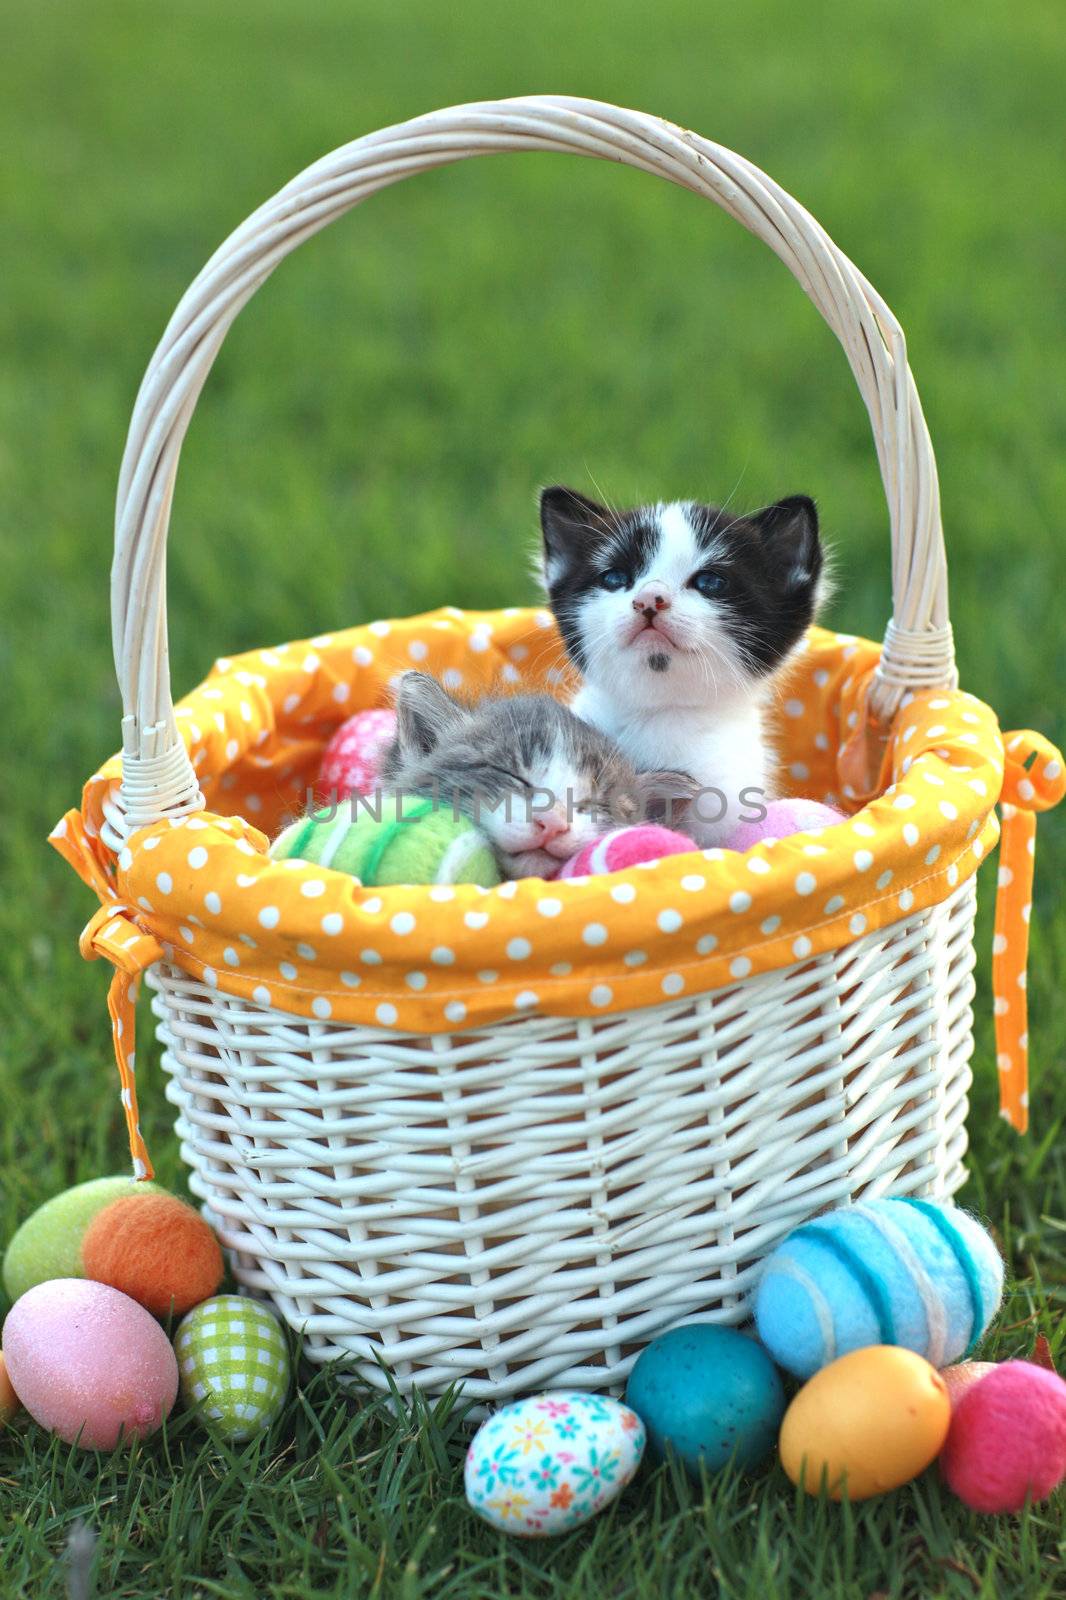 Kittens in a Holiday Easter Basket With Eggs